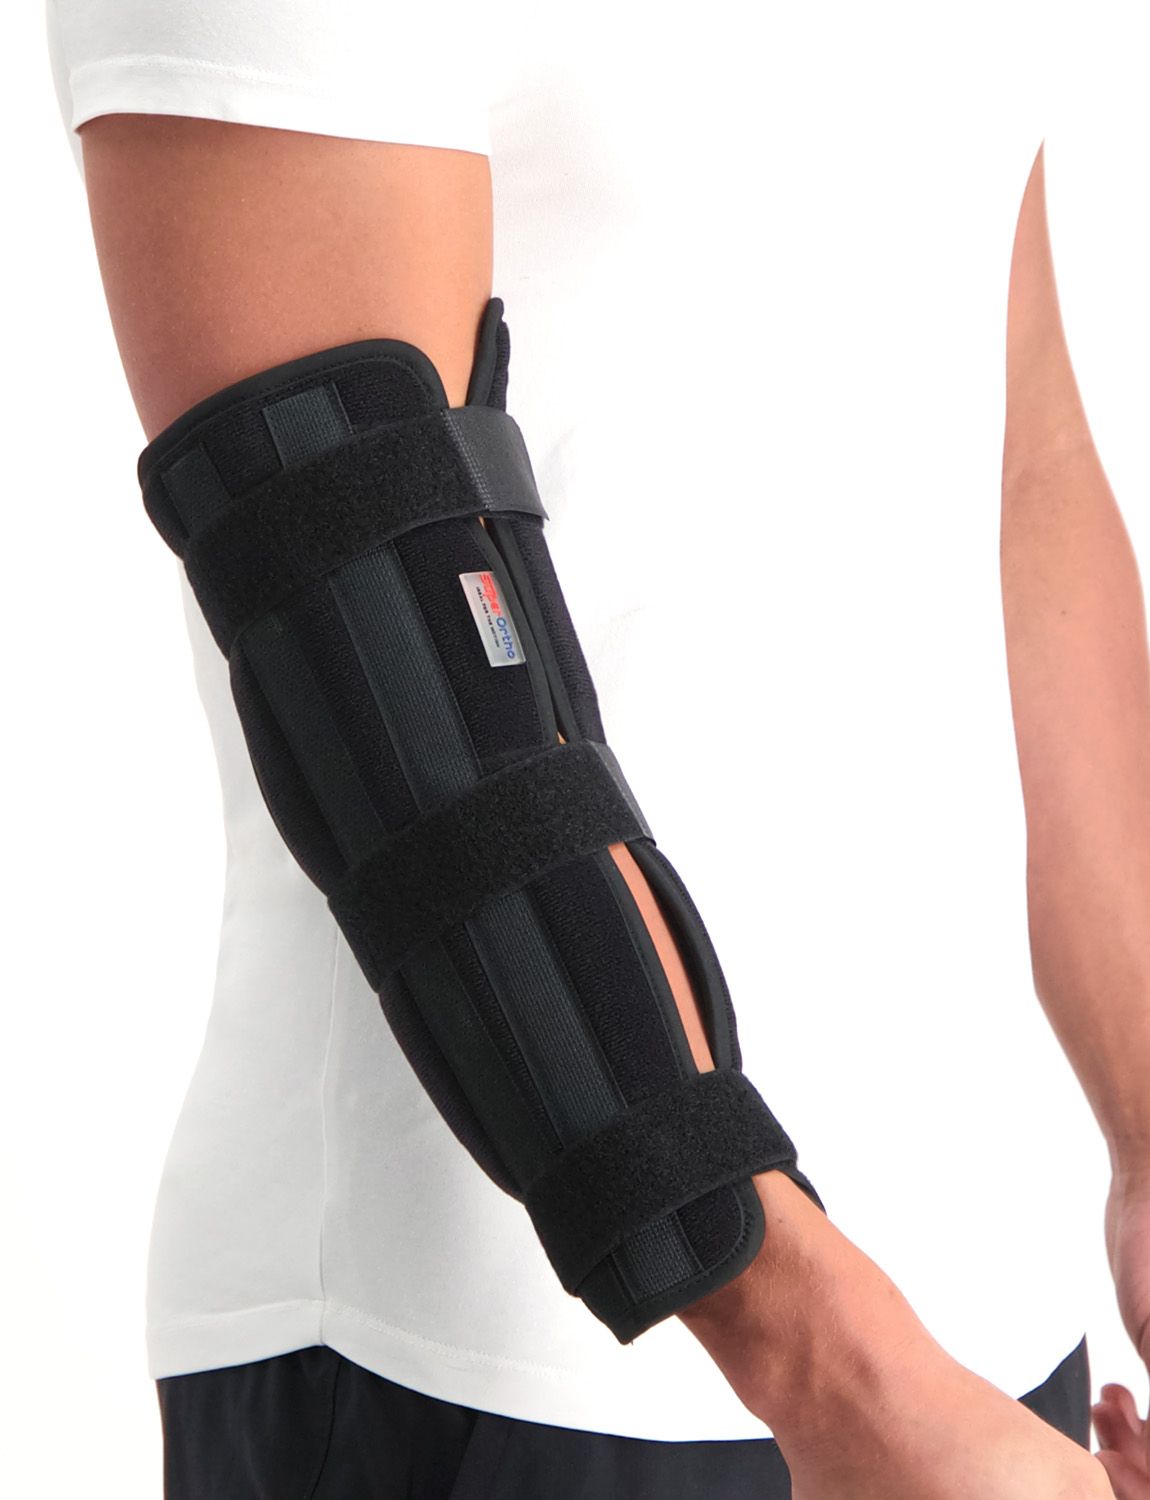 super ortho elbow lower arm splint for sale